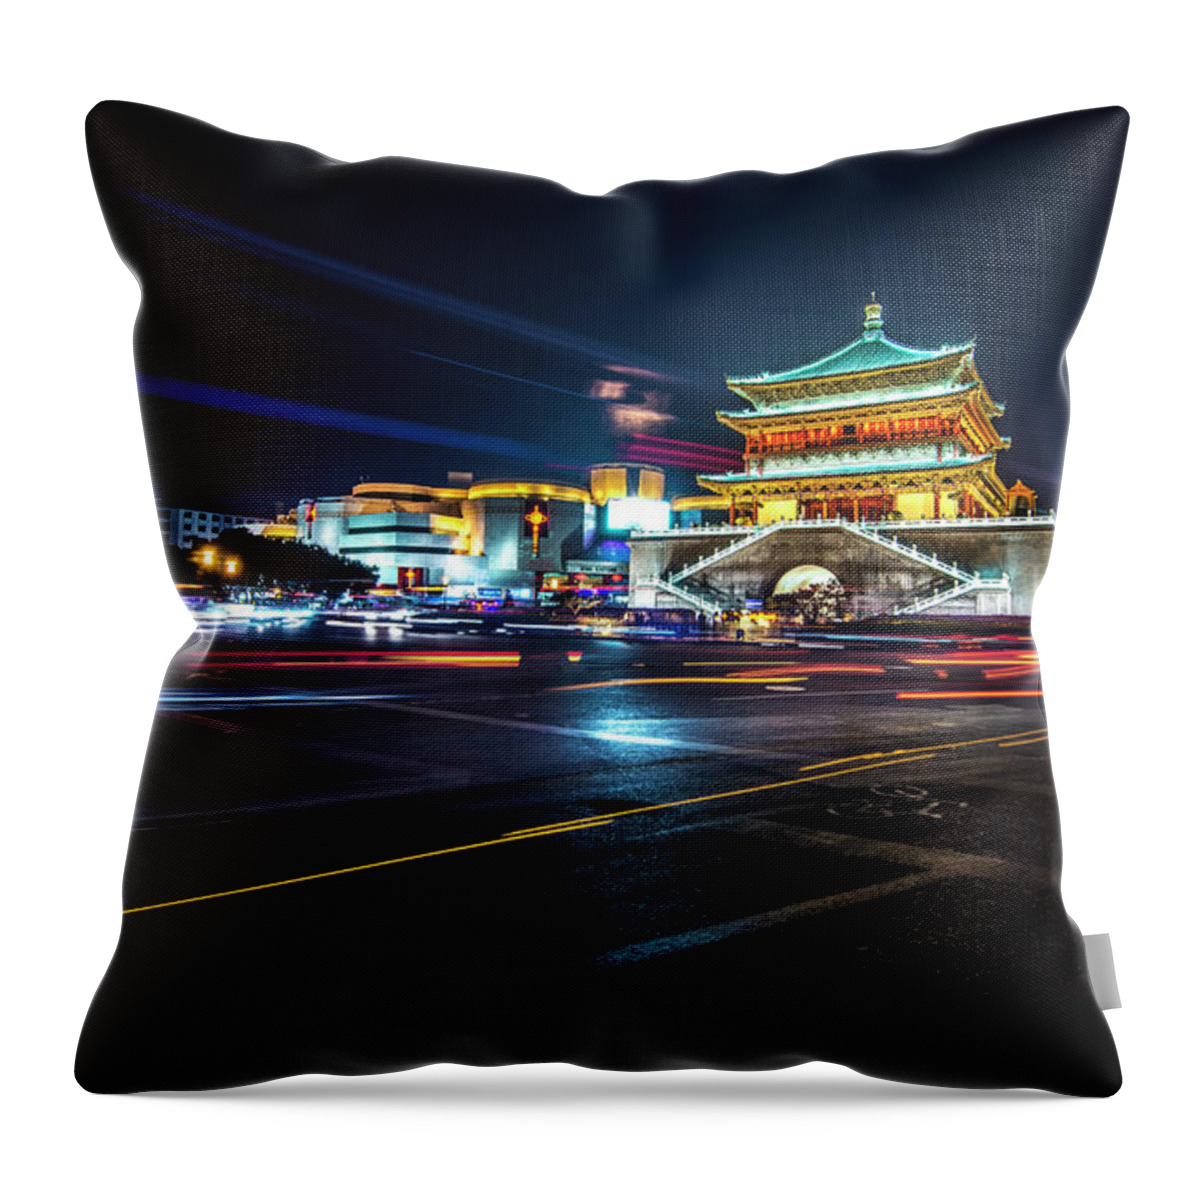 Built Structure Throw Pillow featuring the photograph The Bell Tower Of Xian by Nutexzles